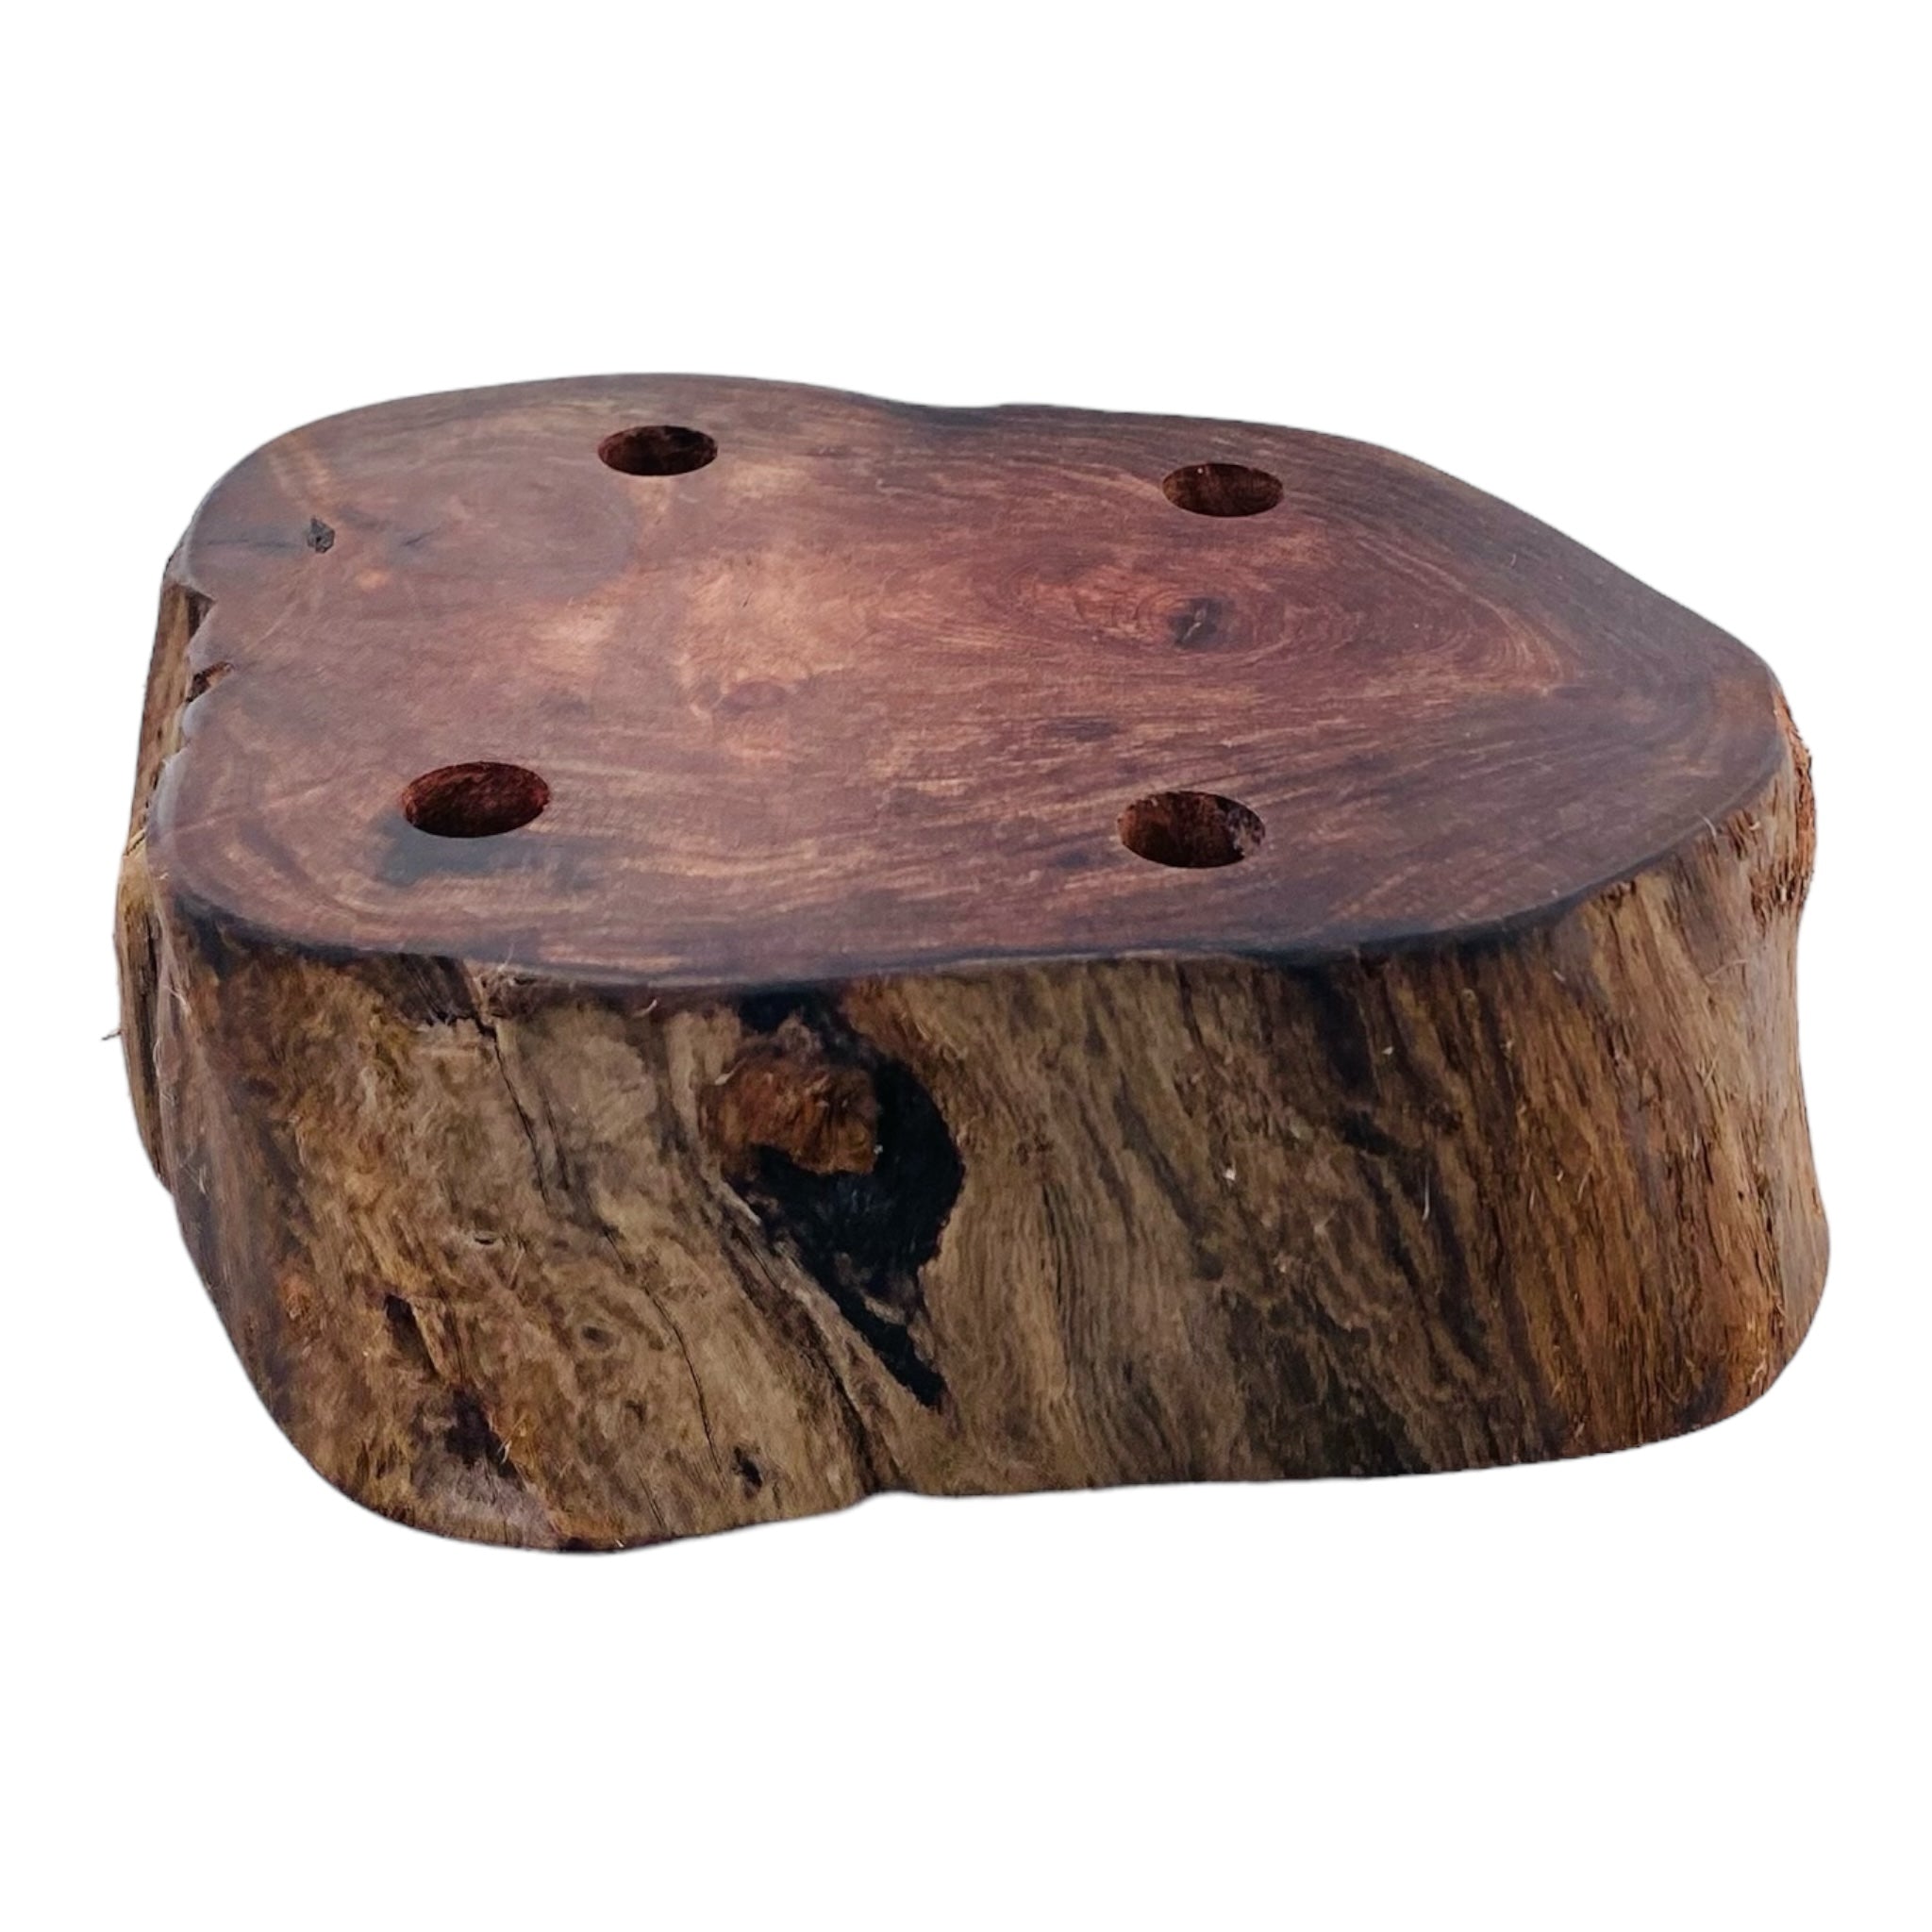 4 Hole Wood Display Stand Holder For 10mm Bong Bowl Pieces Or Quartz Bangers - Red Wood Burl With Live Edge